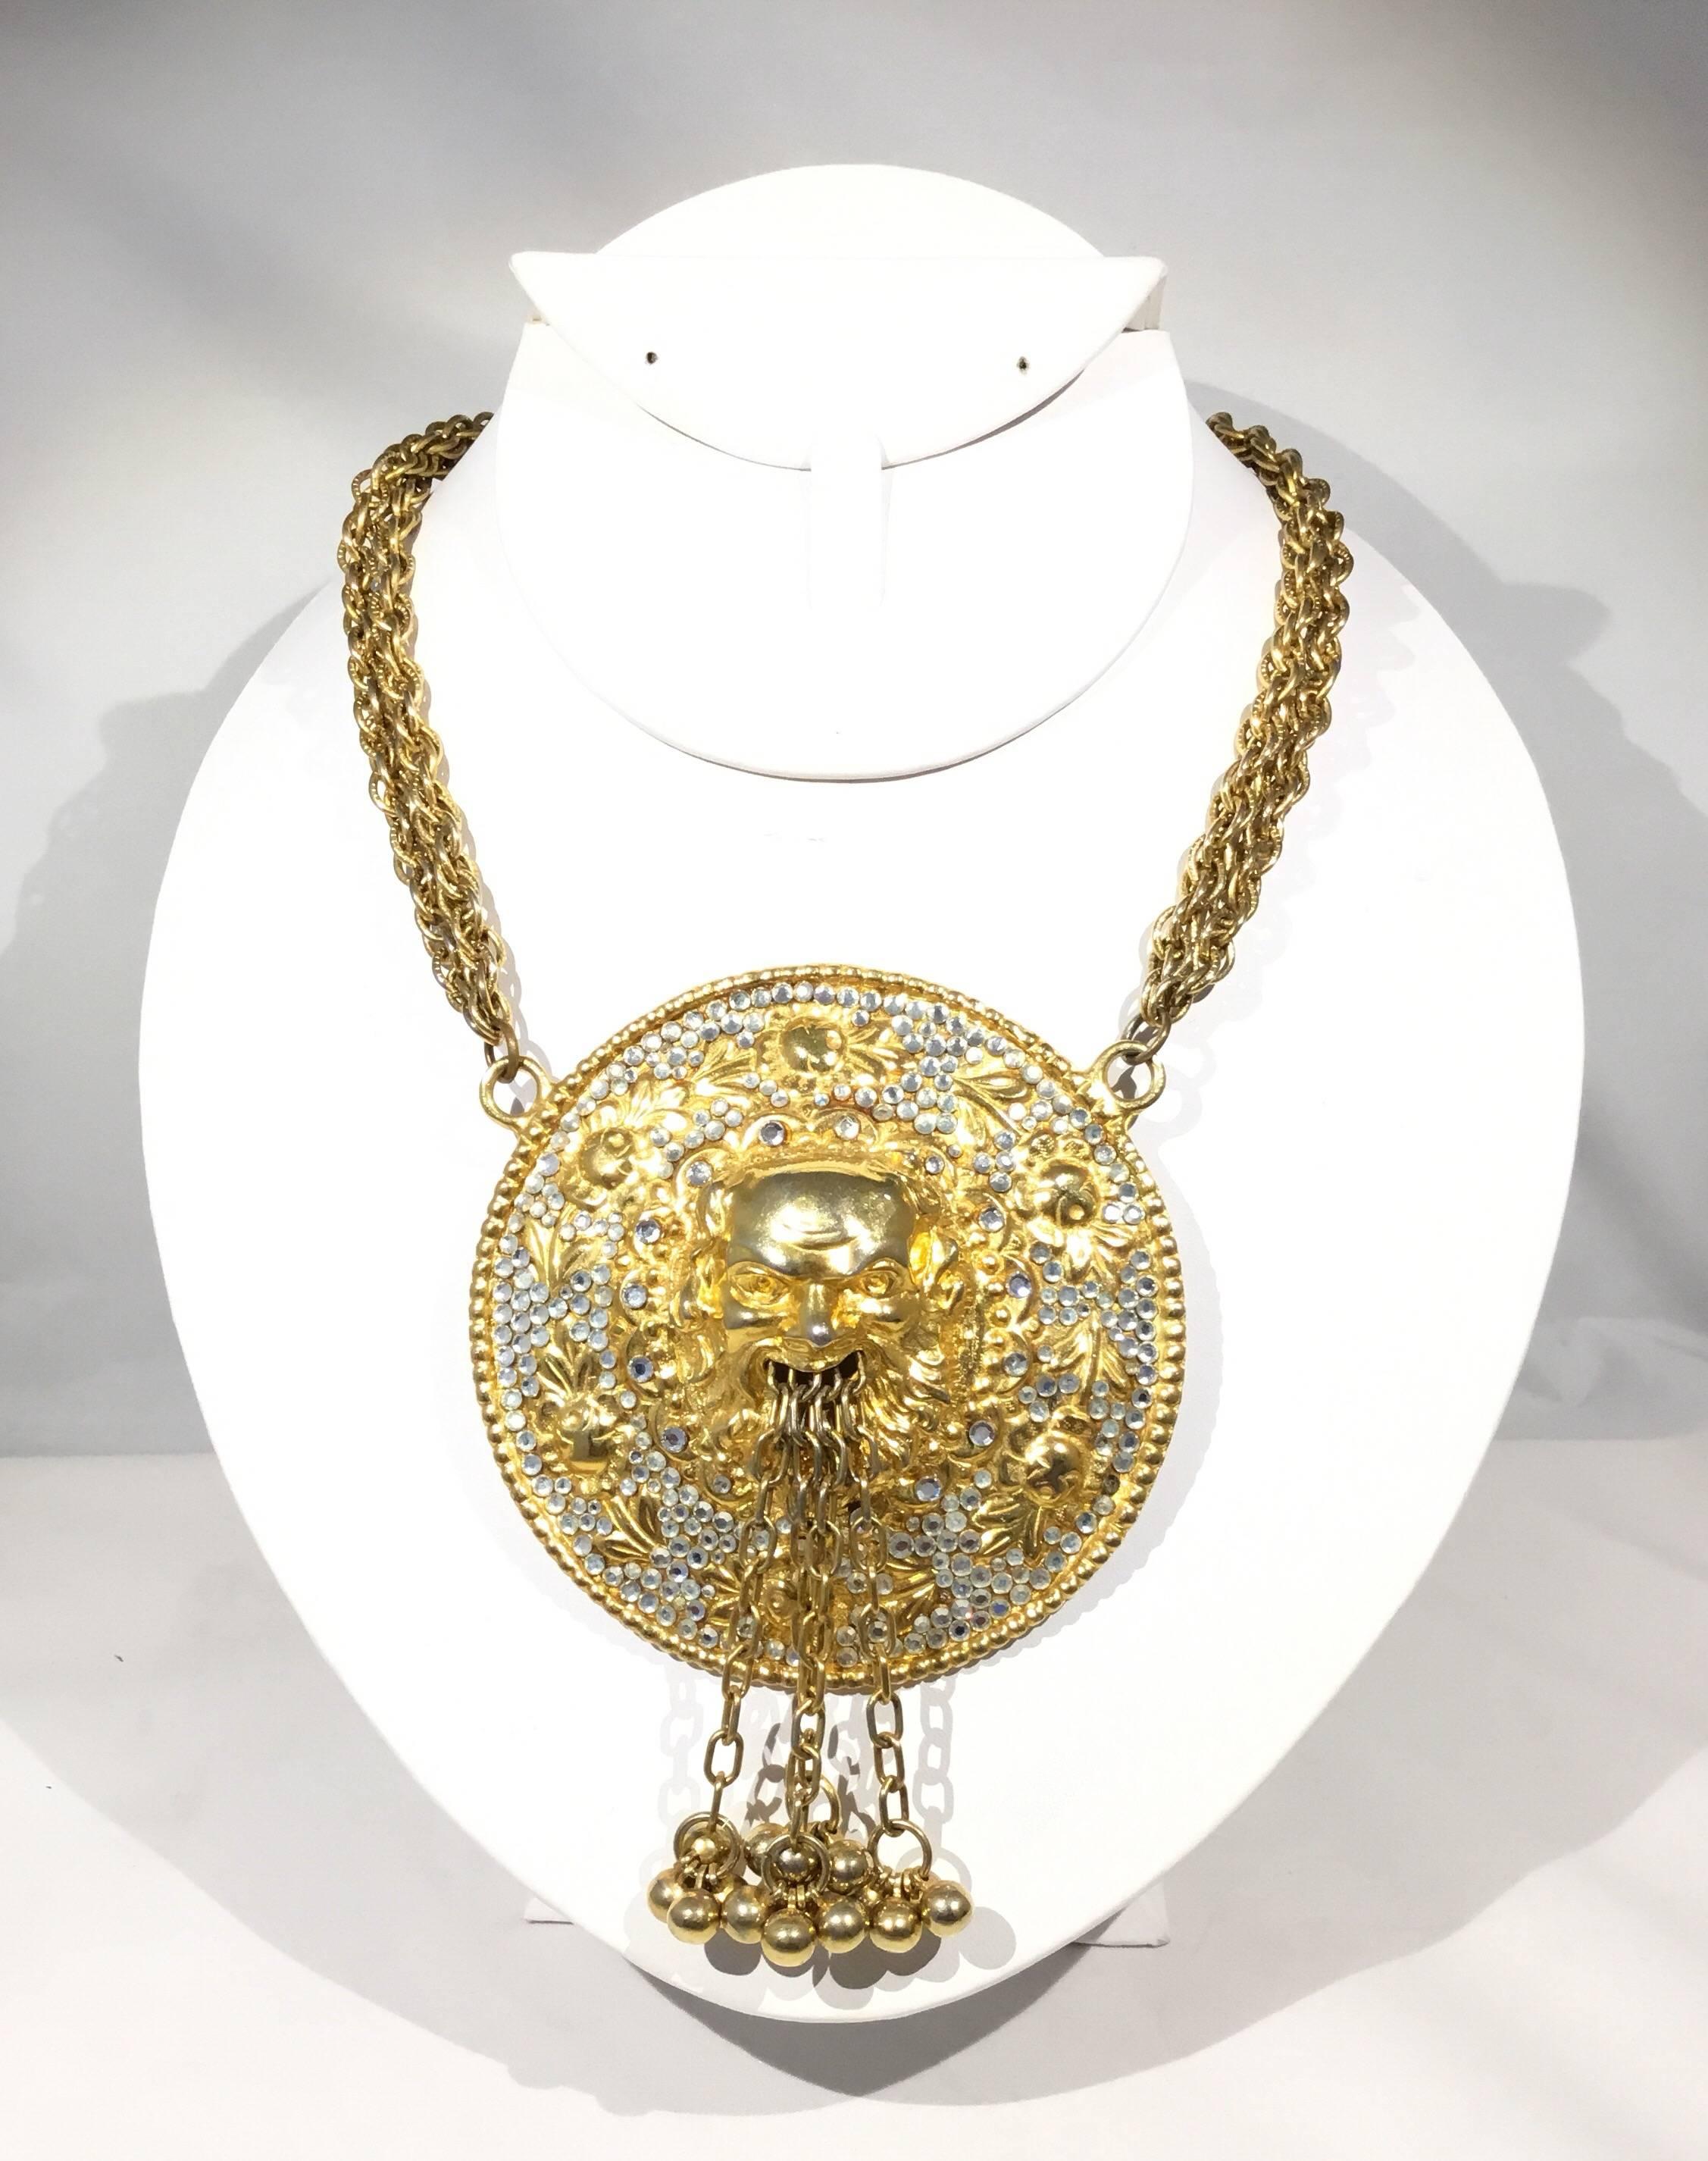 Art to wear Judith Leiber necklace features a massive medallion depicting Bachhus, the Roman God of Wine, with dangling bead balls coming out of the mouth and encrusted with flatback rhinestones around the borders. Double - strand gold tone chain